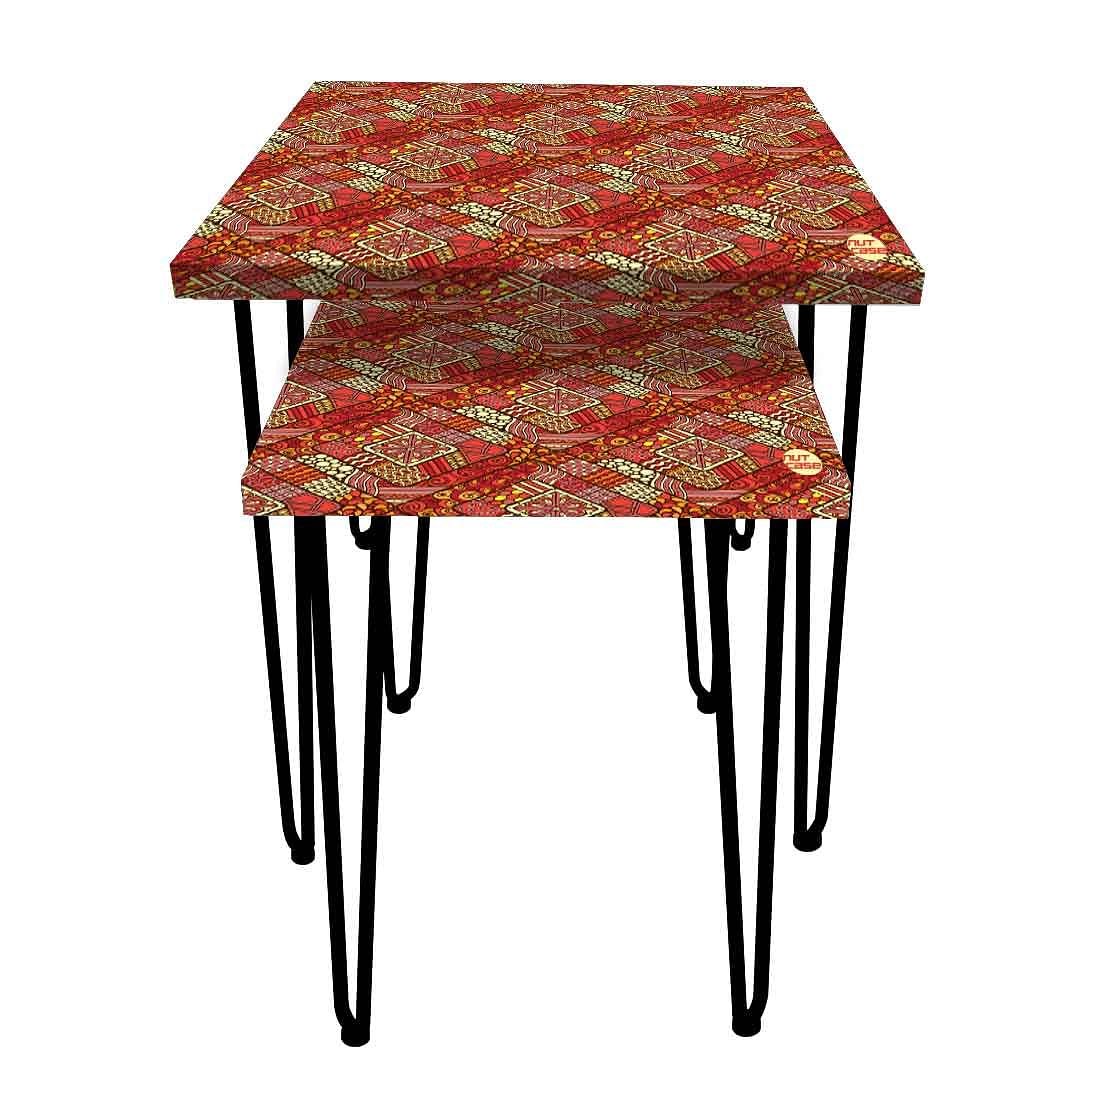 Designer Nesting Tables Tea & Coffee End Table for Living Room - Indian Ethnic Nutcase